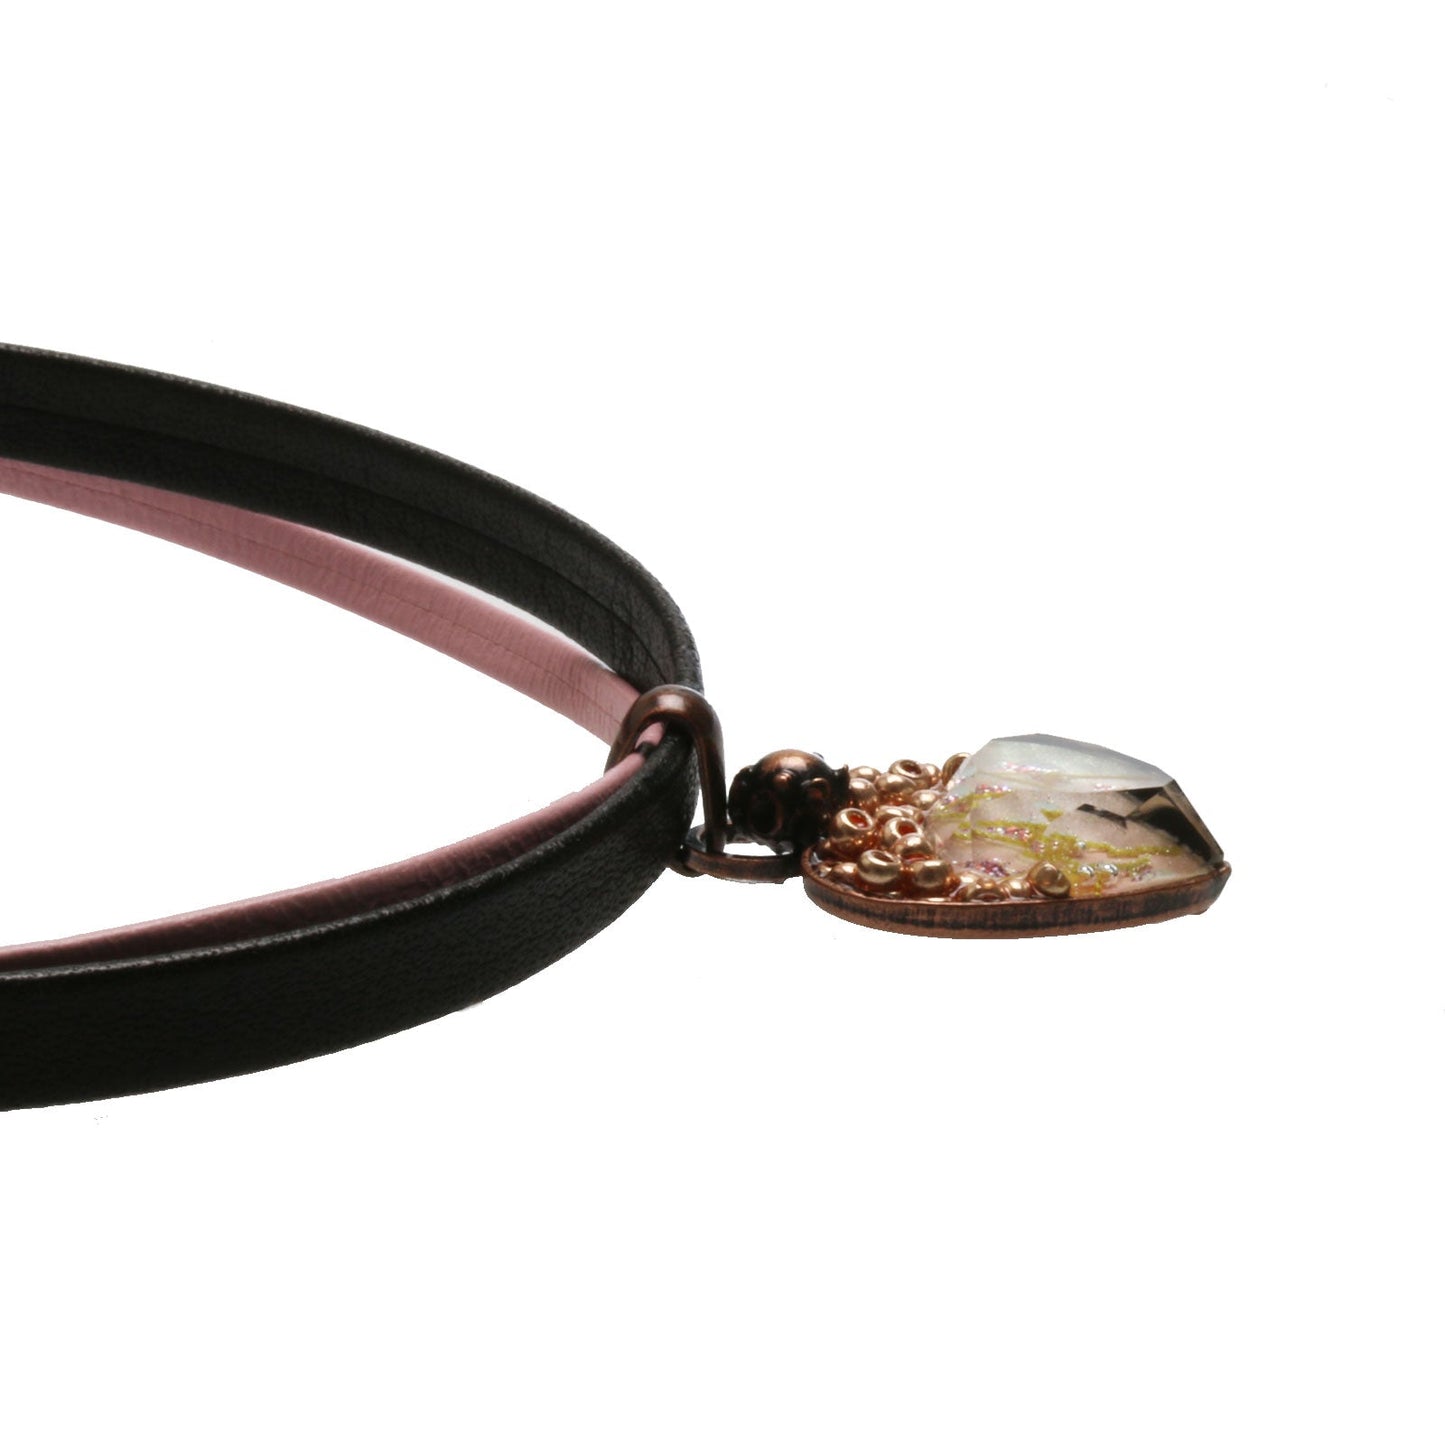 Choker Double Leather Heart Pink Coral TAMARUSAN